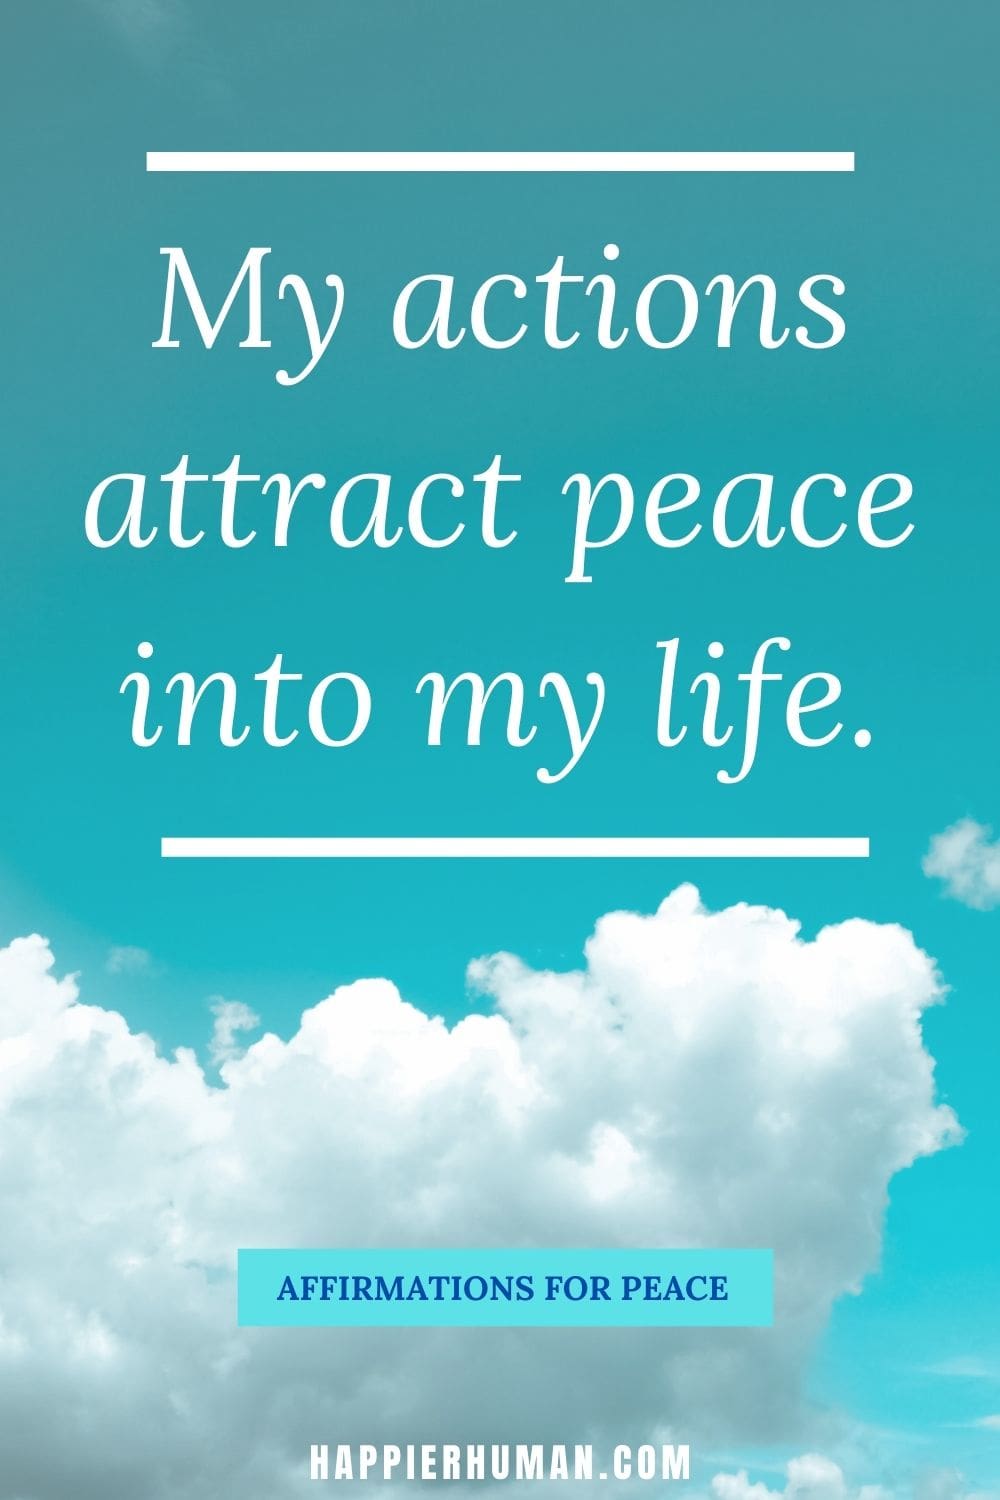 Affirmations for Peace - My actions attract peace into my life. | inner peace quotes | affirmation for healing and peace of mind | affirmations for comfort #mindfulness #serenity #harmony